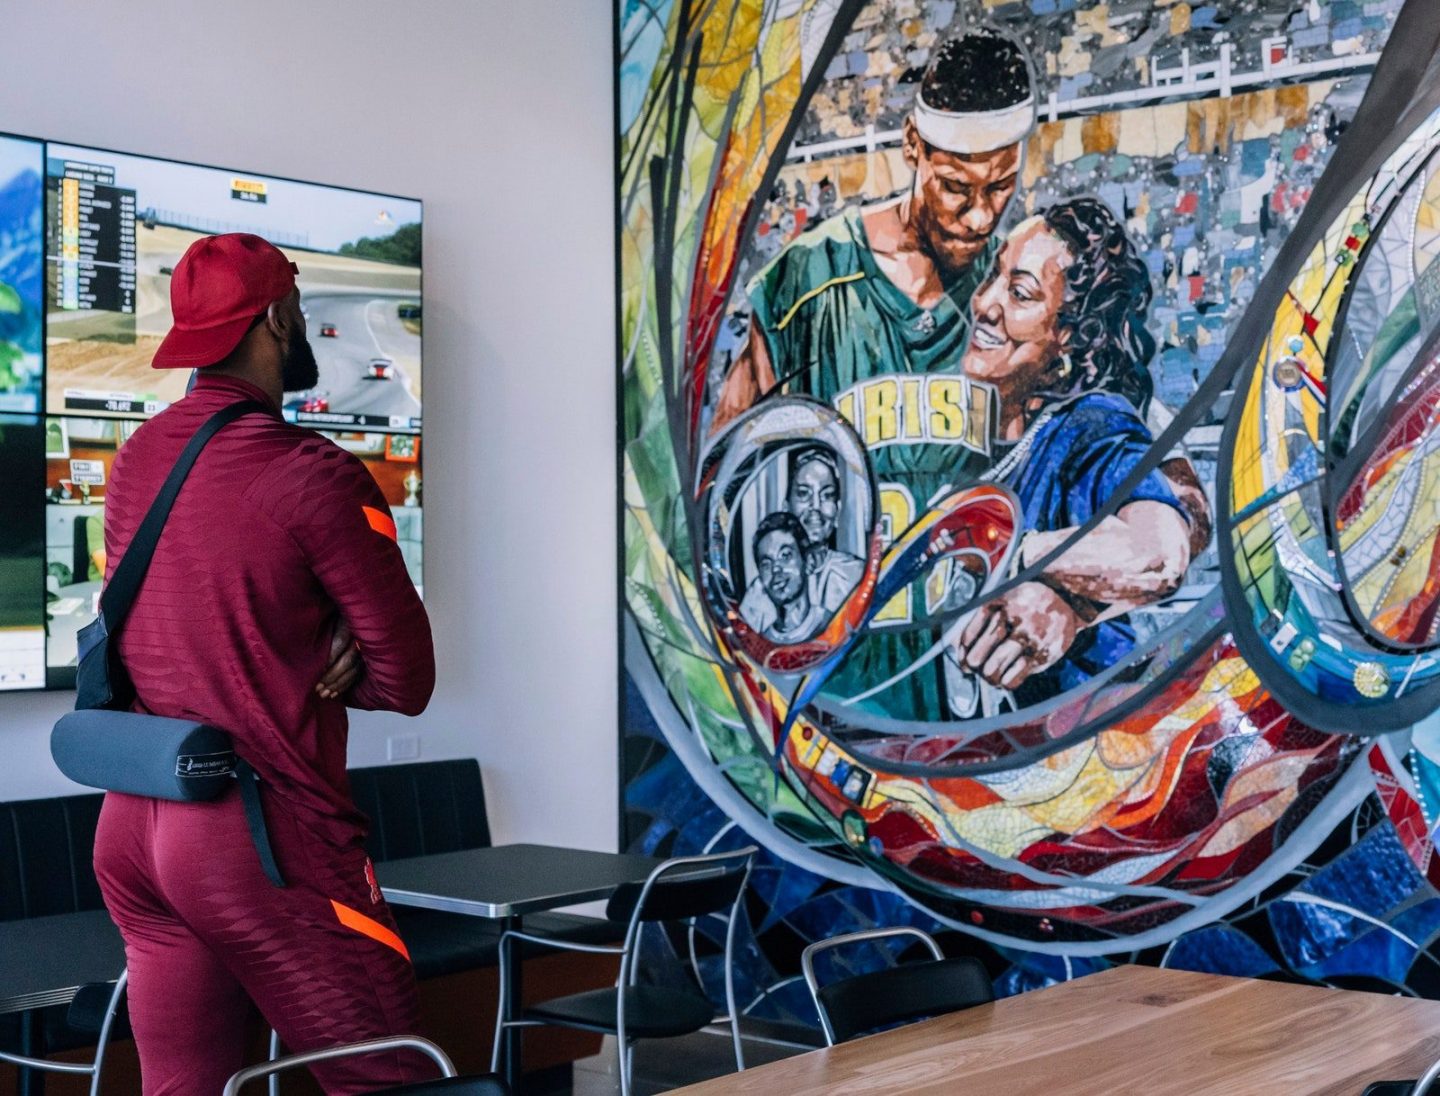 New LeBron James Innovation Center is the home of Nike's new Sport